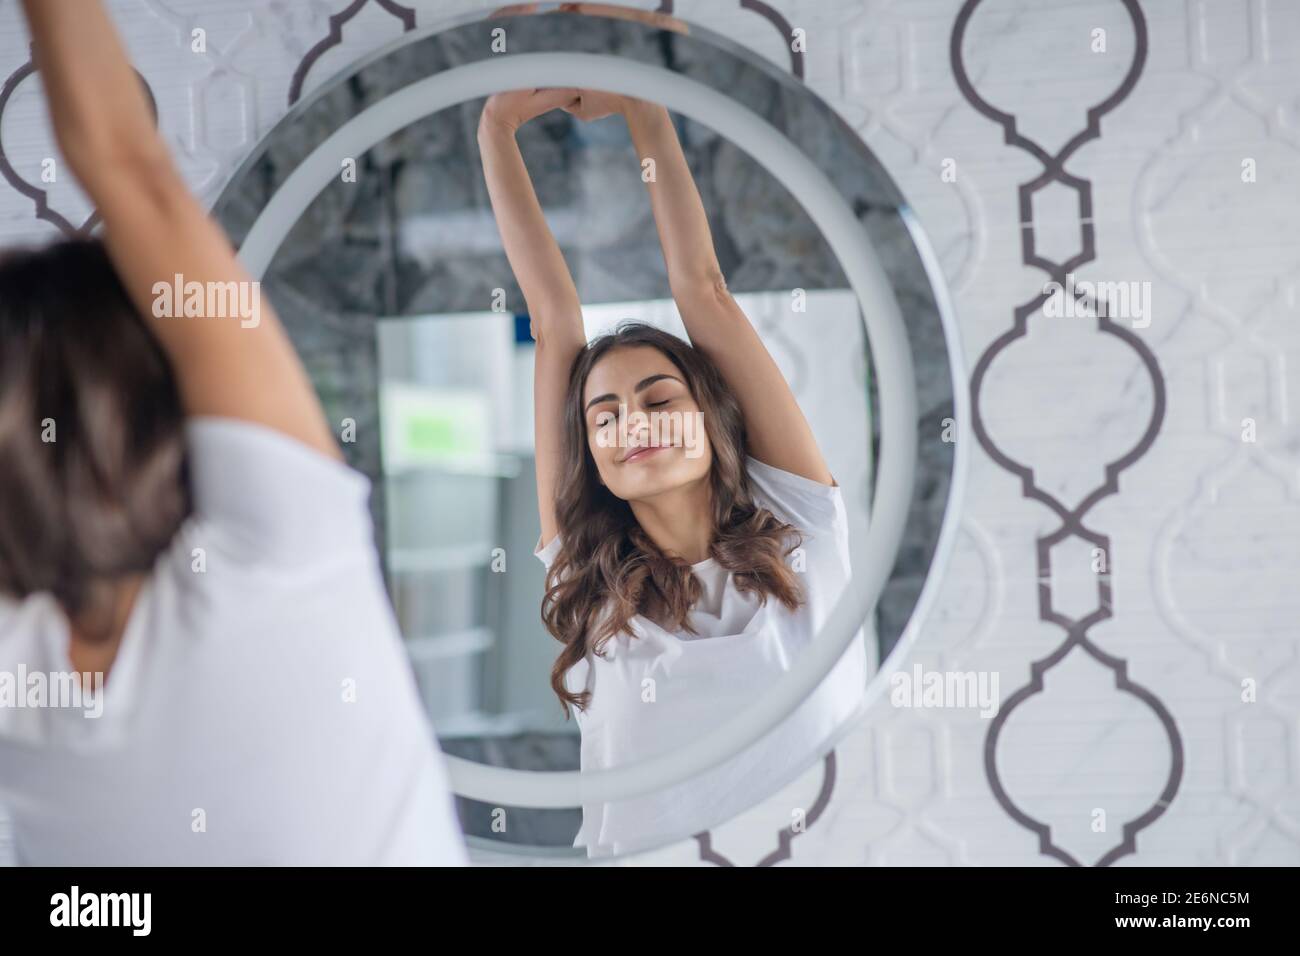 Woman stretching her back near the mirror Stock Photo